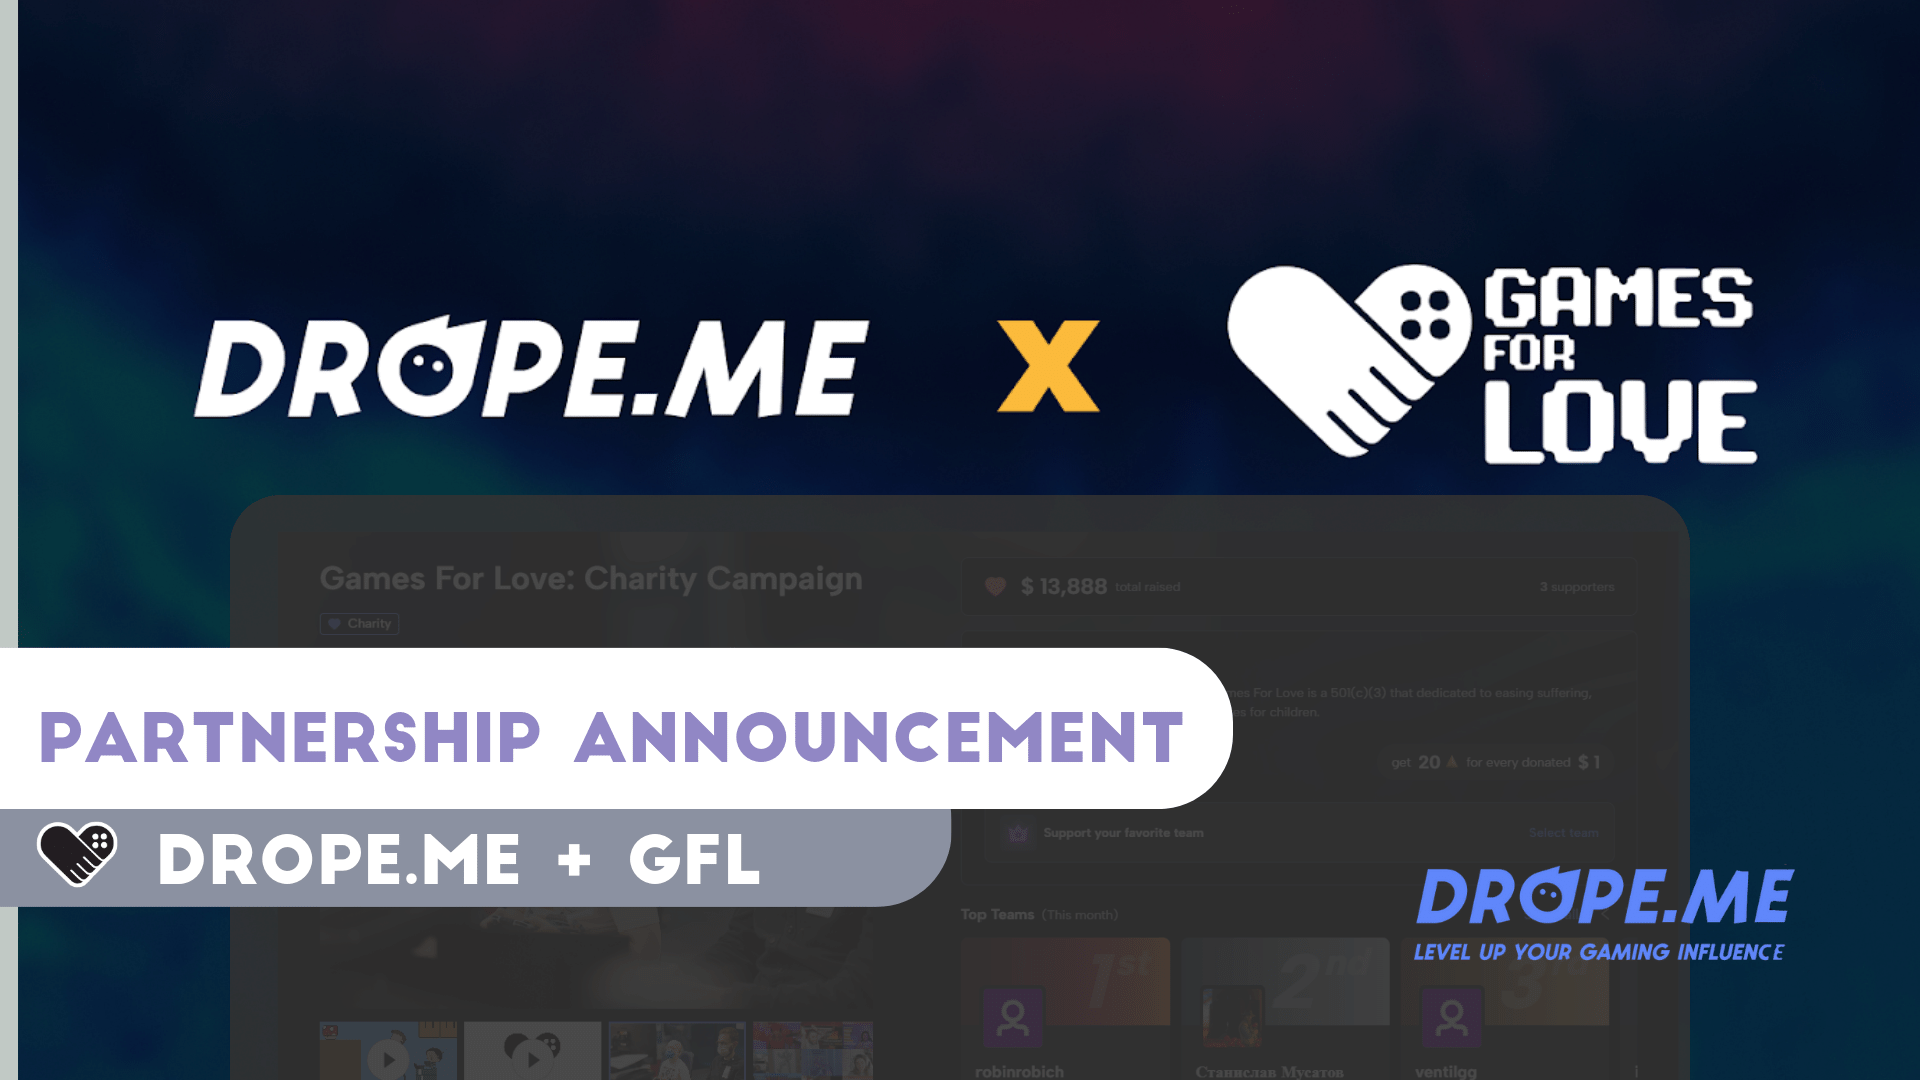 Games For Love and Drope.me Unite to Empower Micro-Streamers and Help Kids